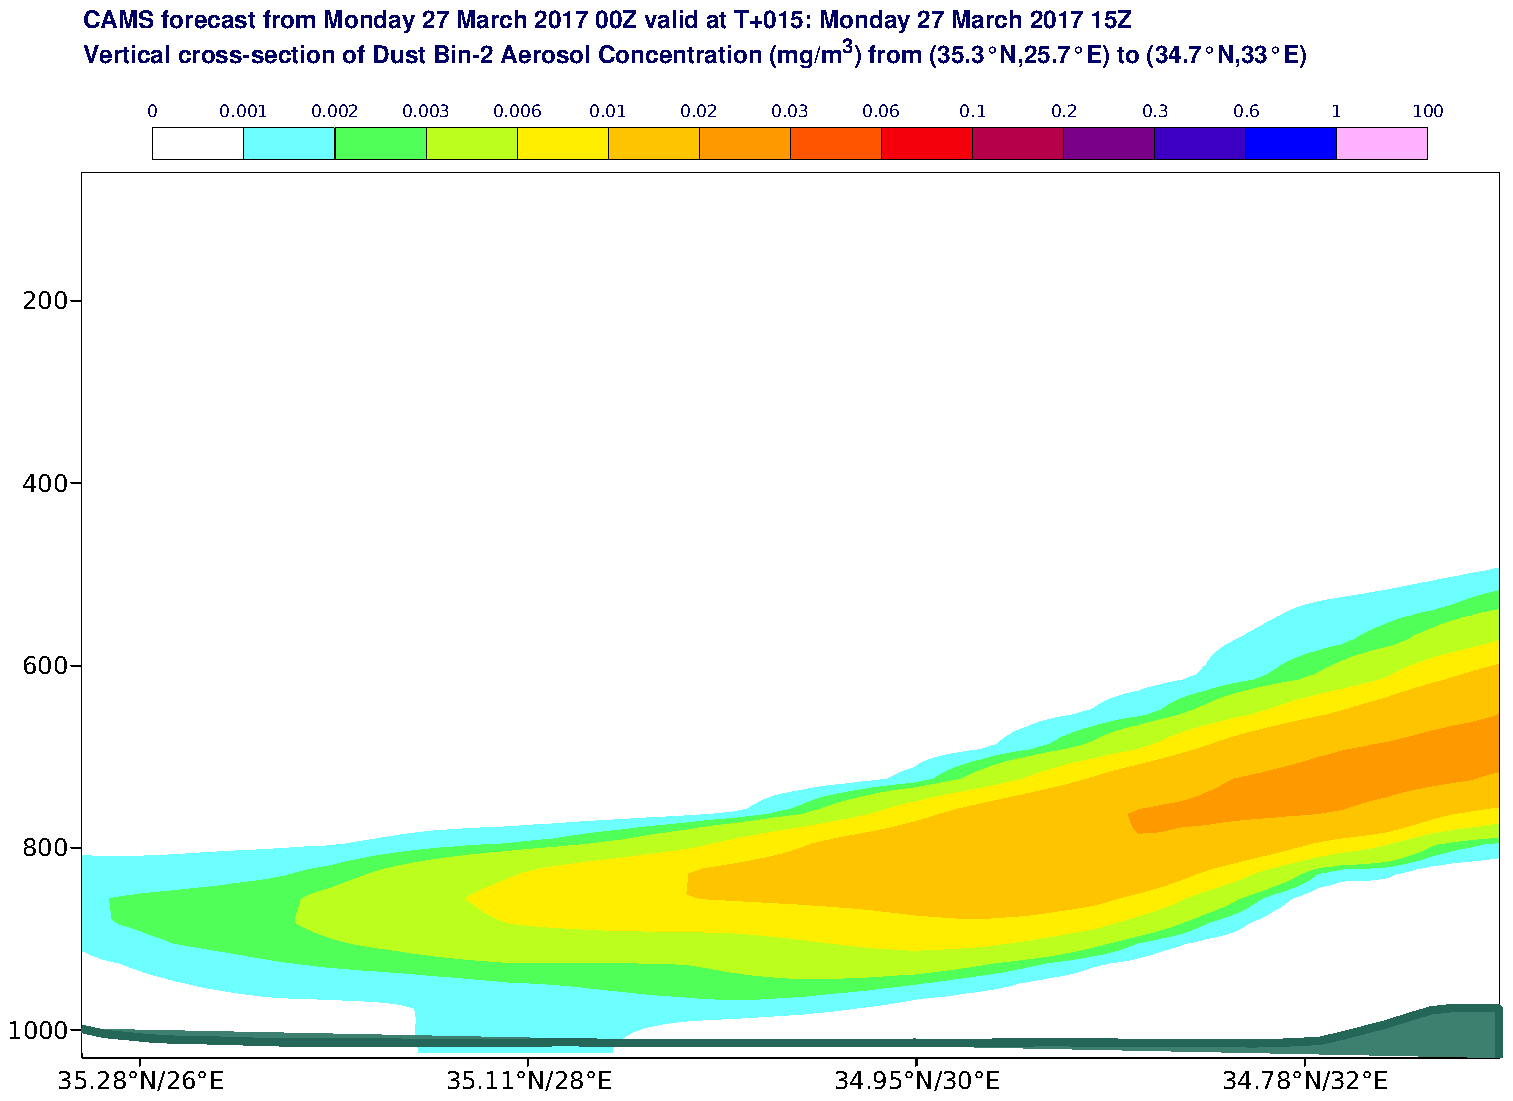 Vertical cross-section of Dust Bin-2 Aerosol Concentration (mg/m3) valid at T15 - 2017-03-27 15:00